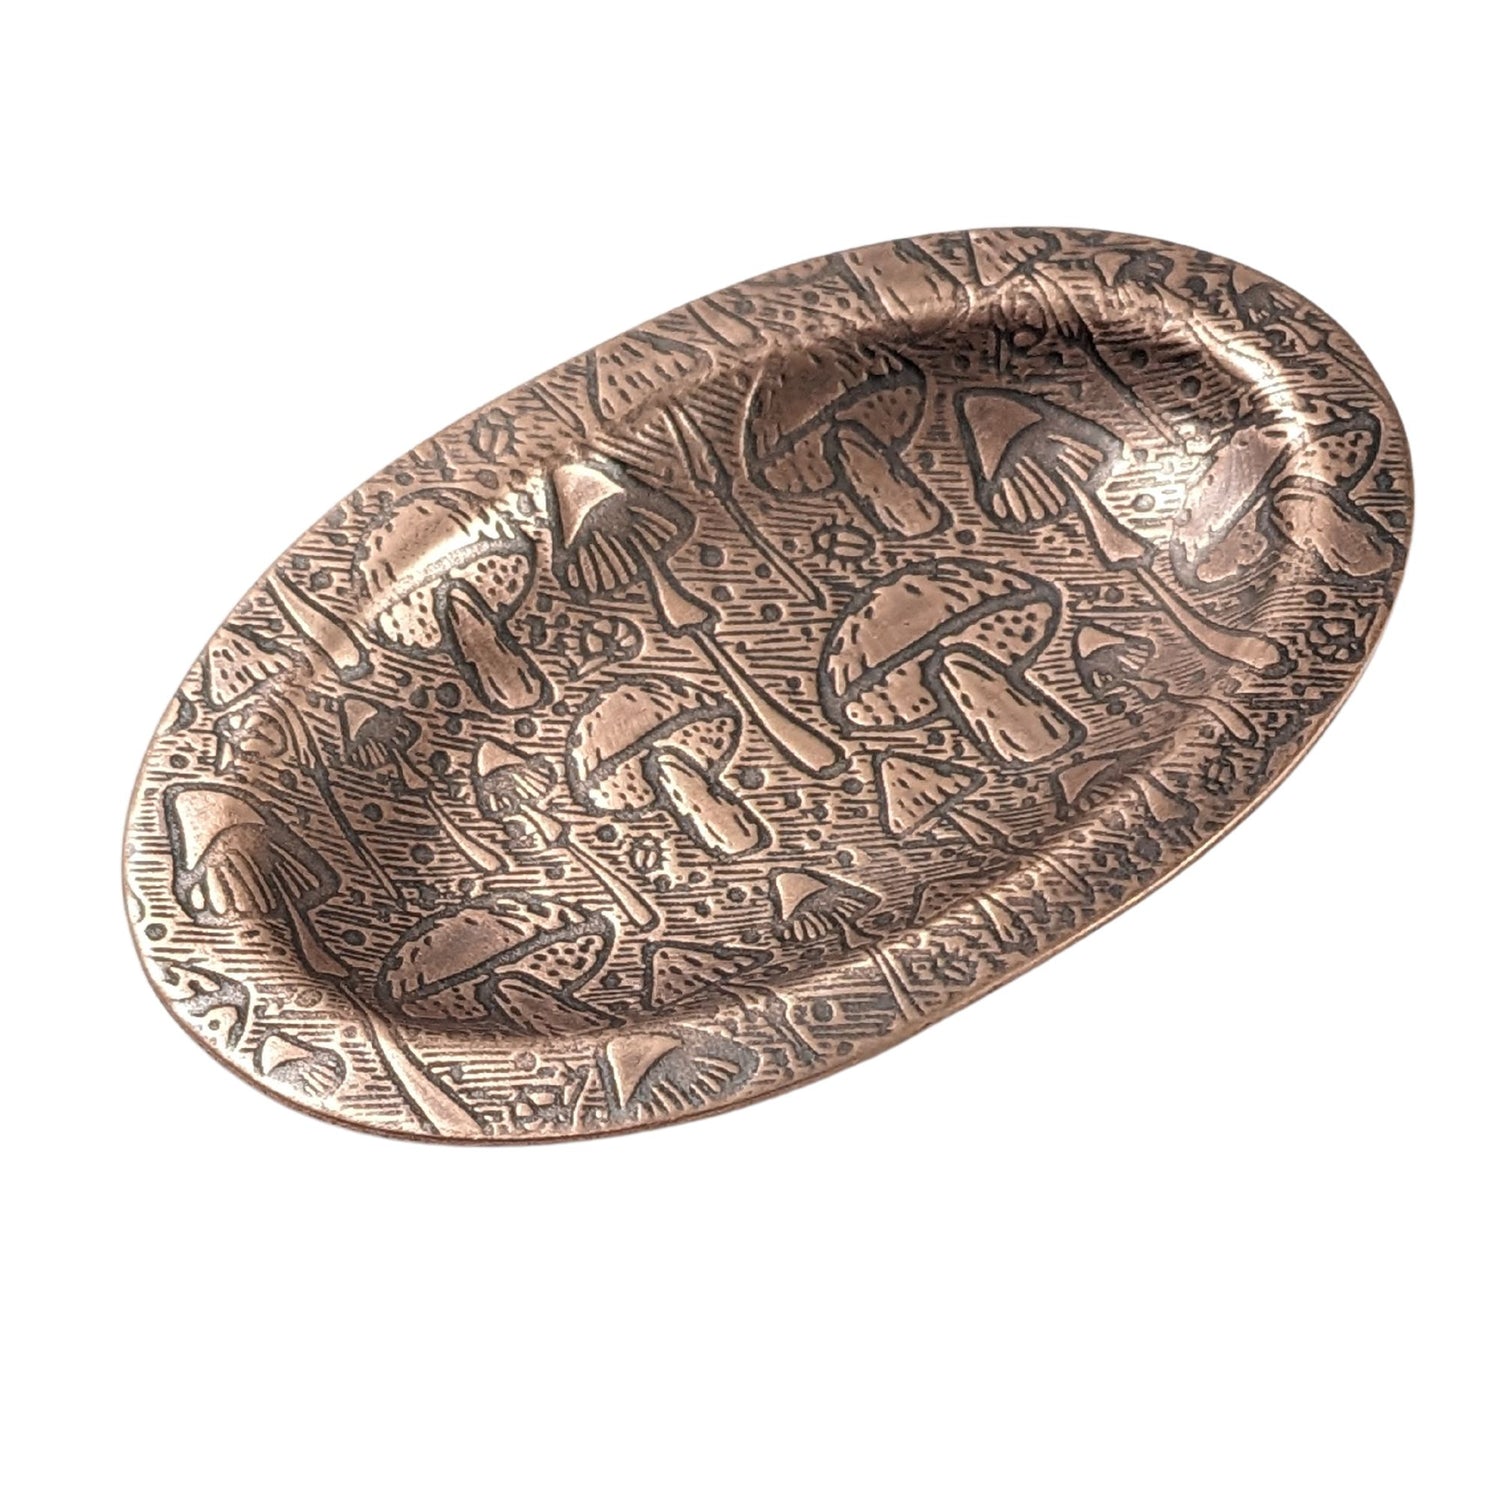 An oval copper ring dish with a raised edge. The dish has an impressed pattern of a variety of mushrooms